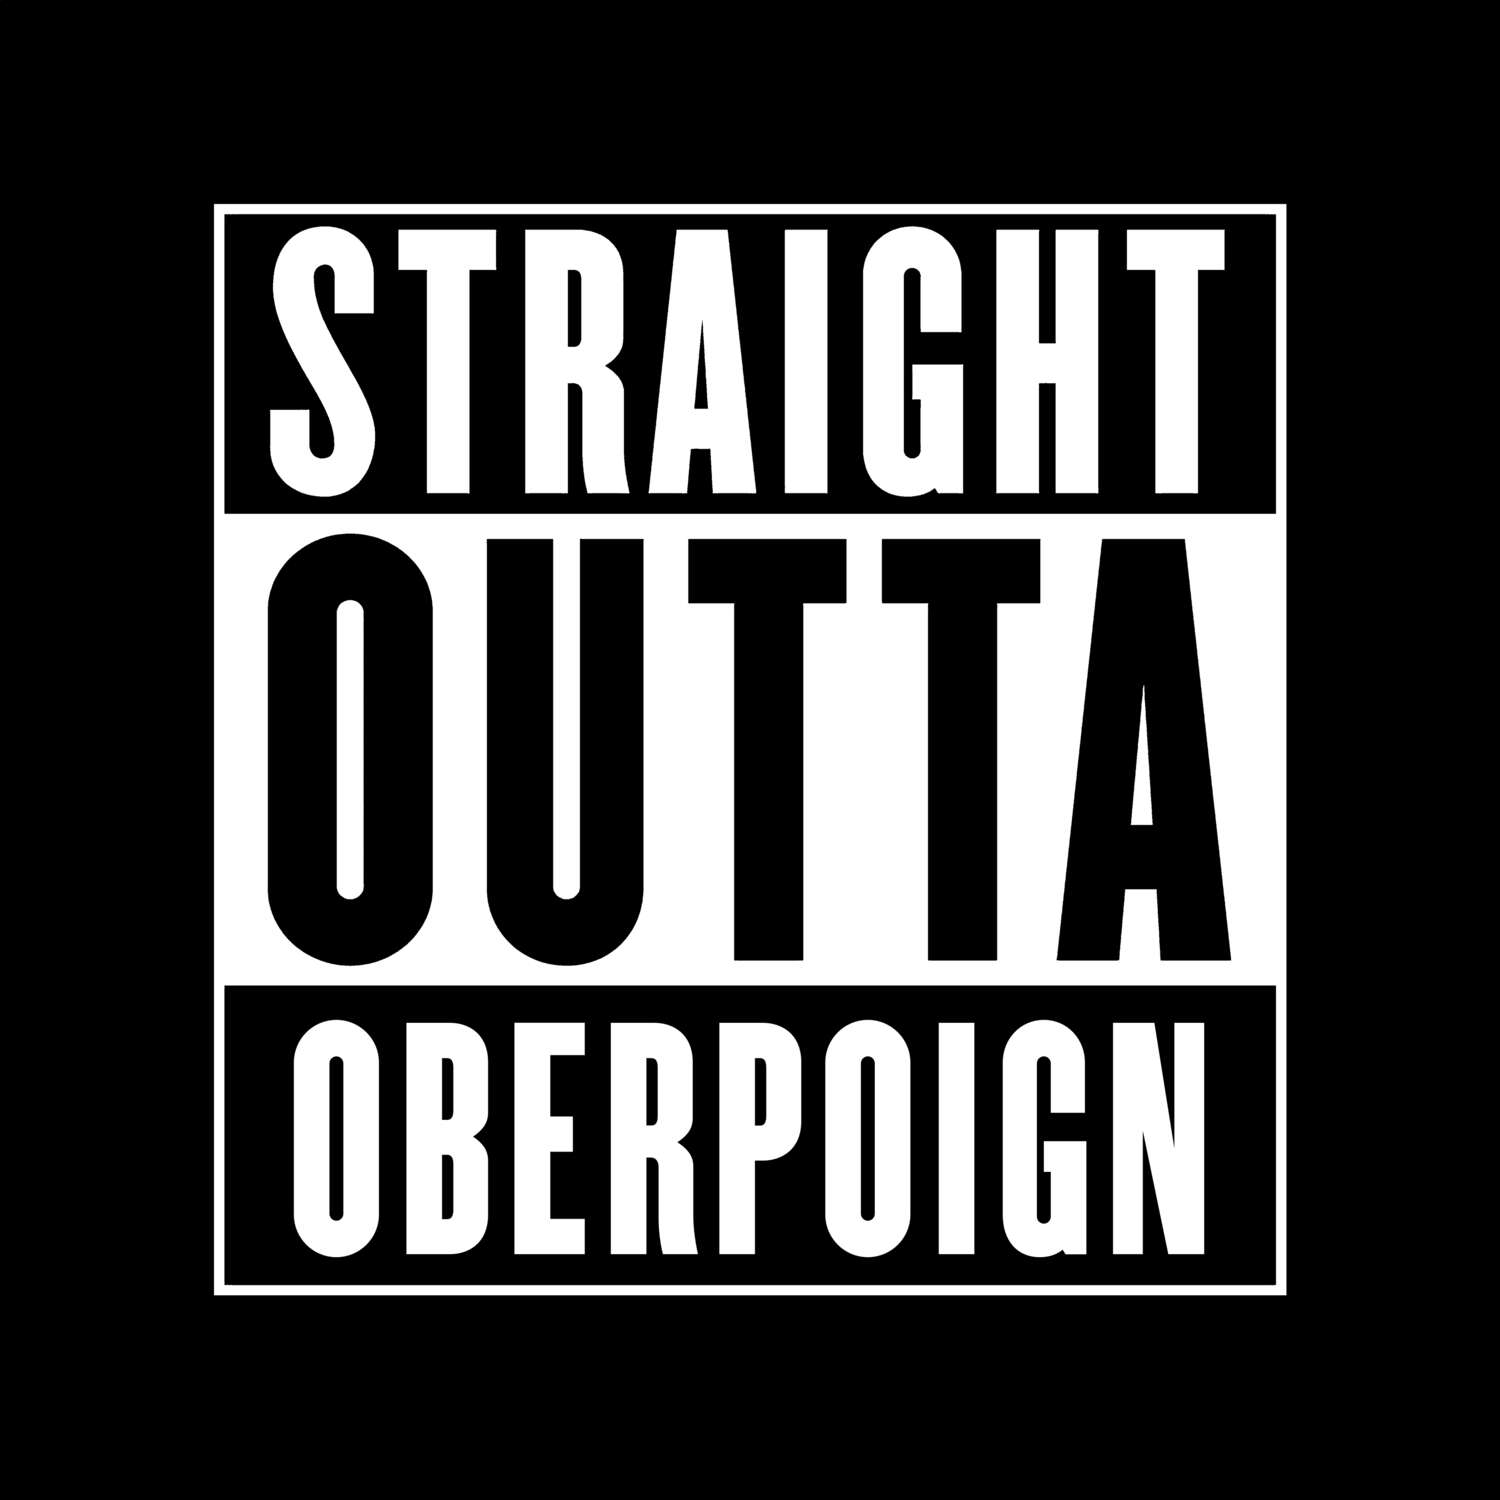 Oberpoign T-Shirt »Straight Outta«